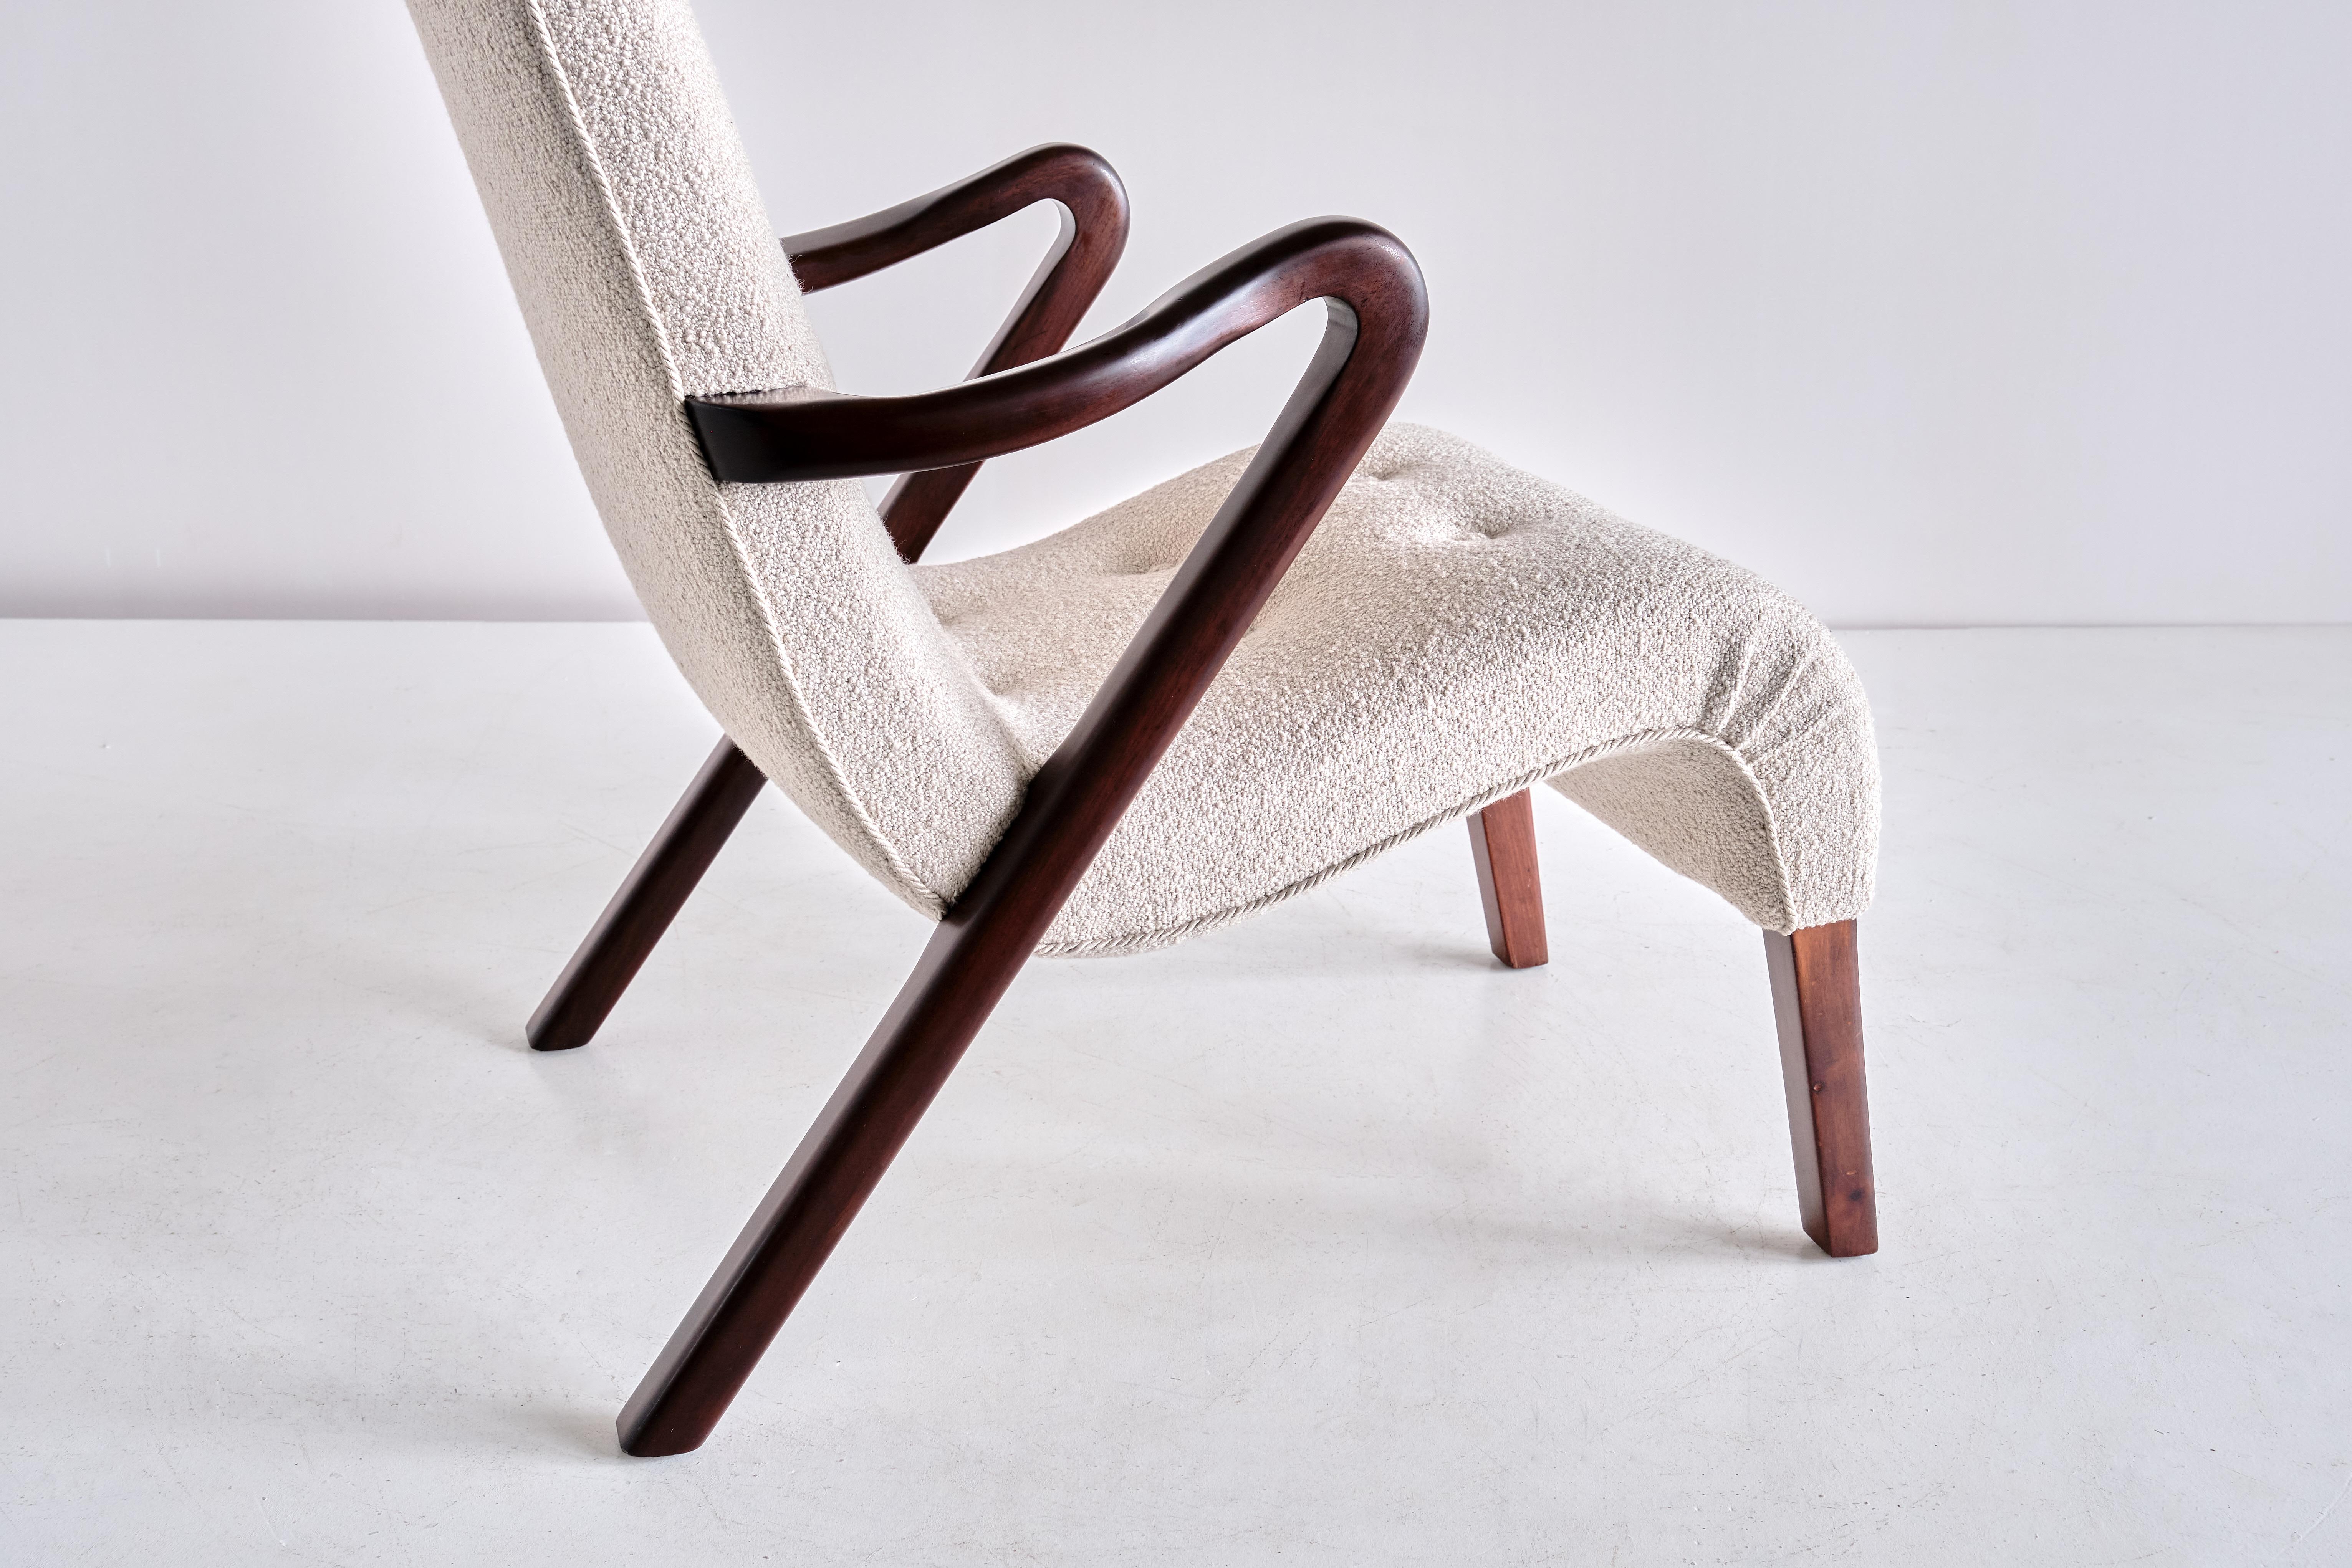 Axel Larsson Armchair in Bouclé and Mahogany, Sweden, 1940s For Sale 2